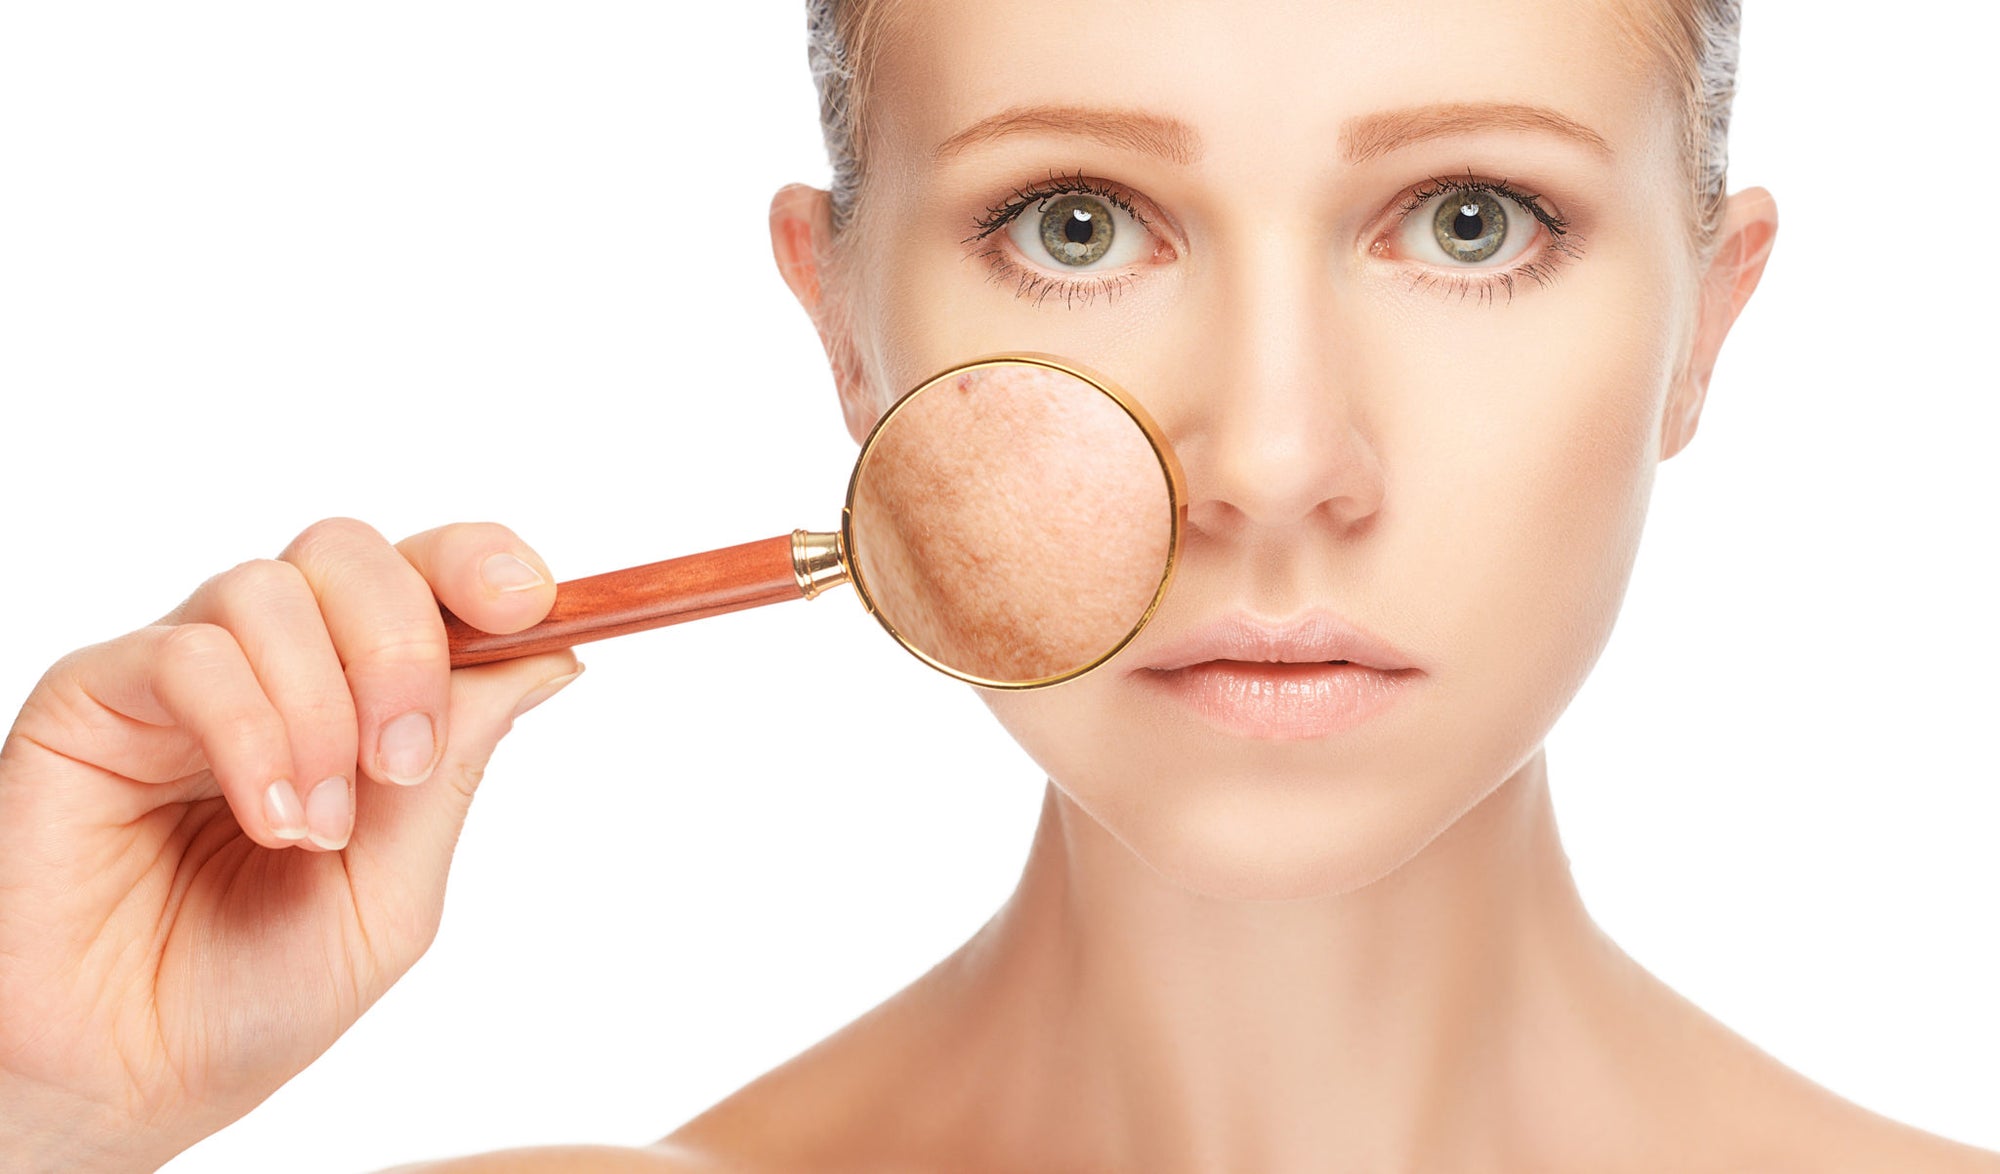 Freckles, Melasma, Chloasma, Age Spots......Your complete guide on how to get rid of them.